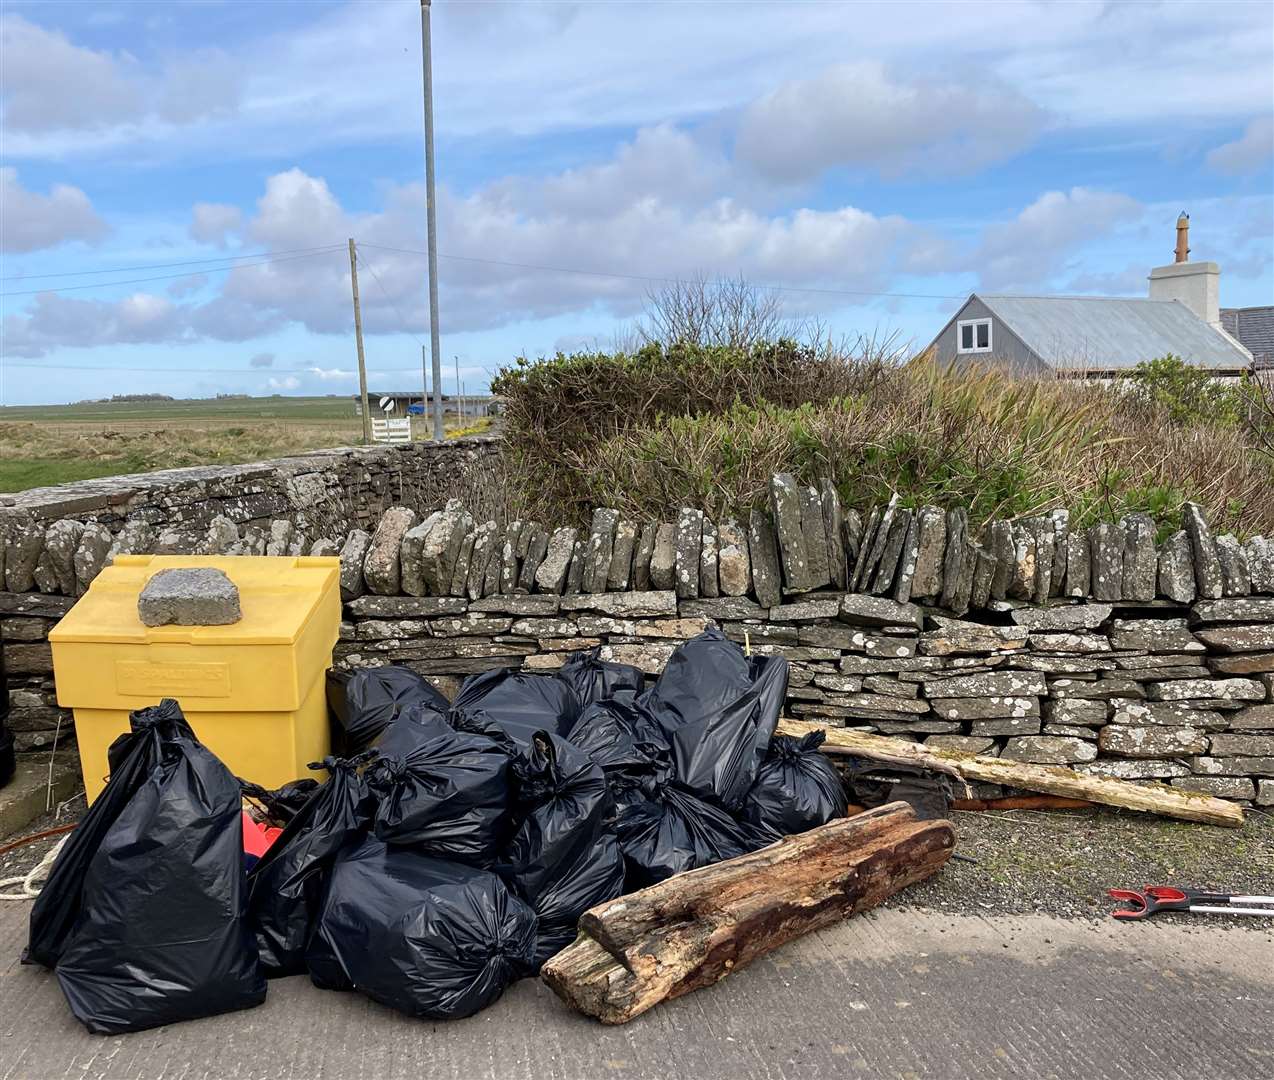 Some of the many bags of rubbish collected at Staxigoe.